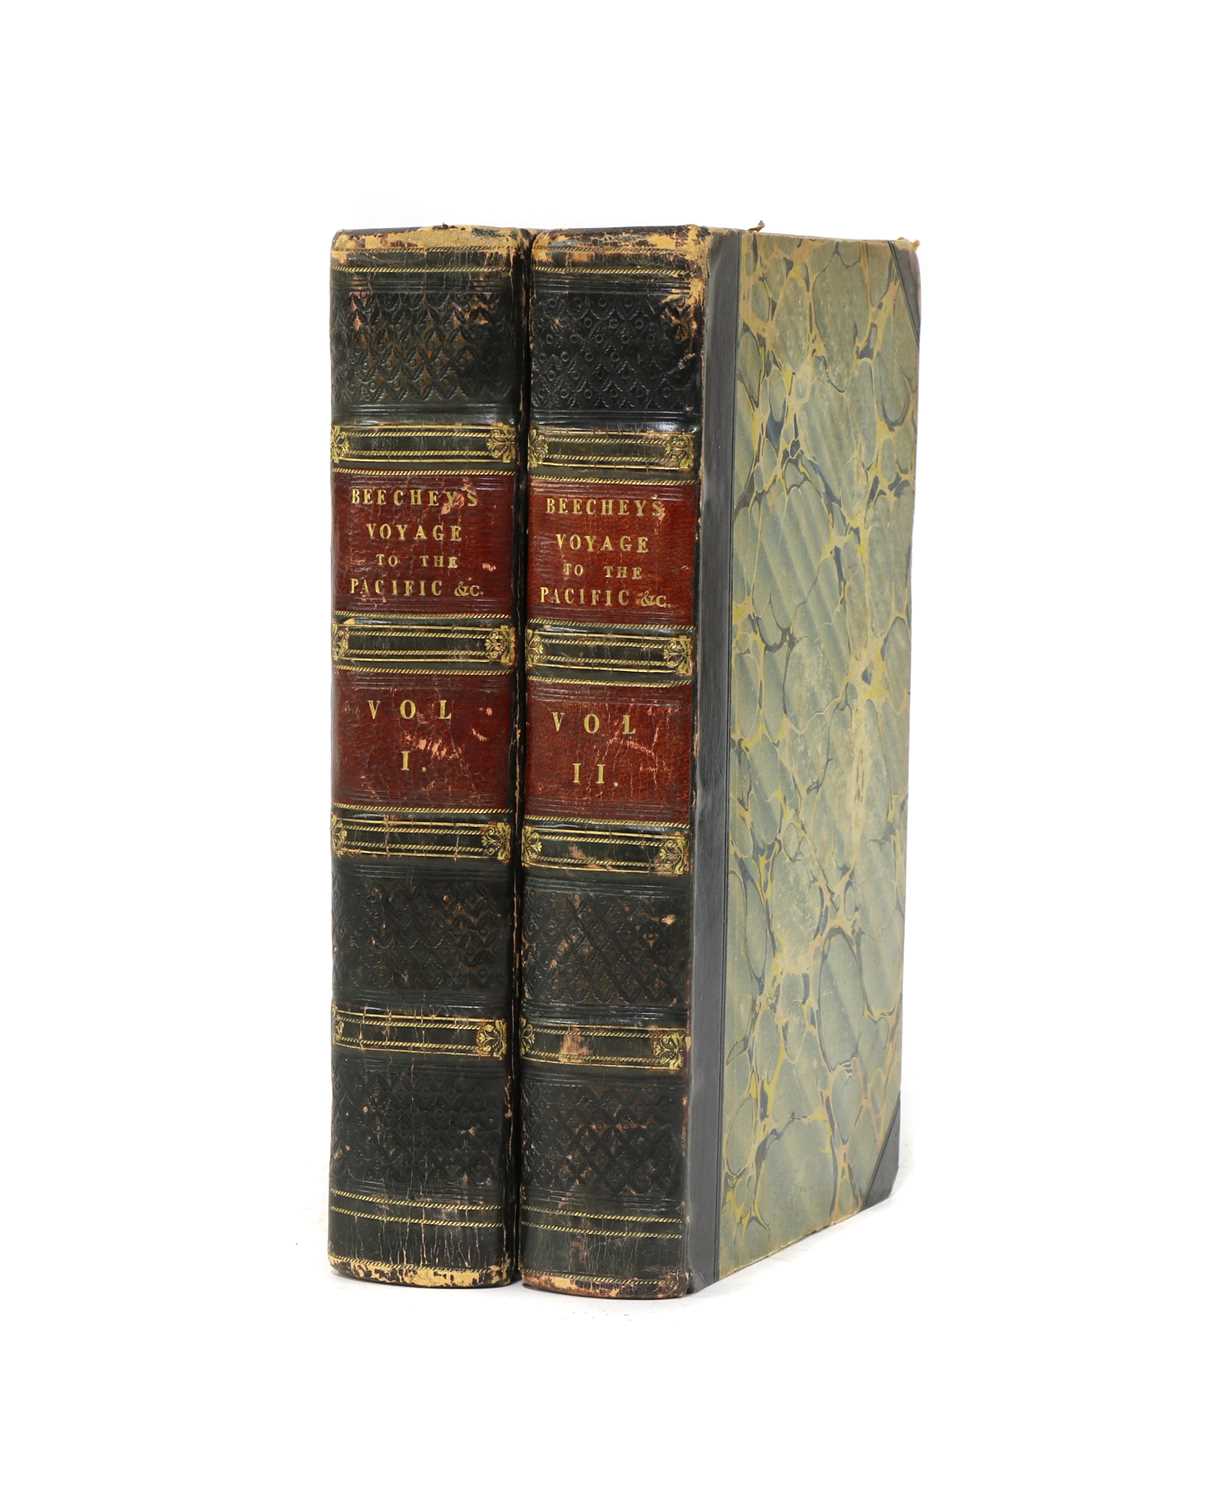 Lot 112 - BEECHEY, Frederick William: Narrative of a Voyage to the Pacific and Beering's Strait